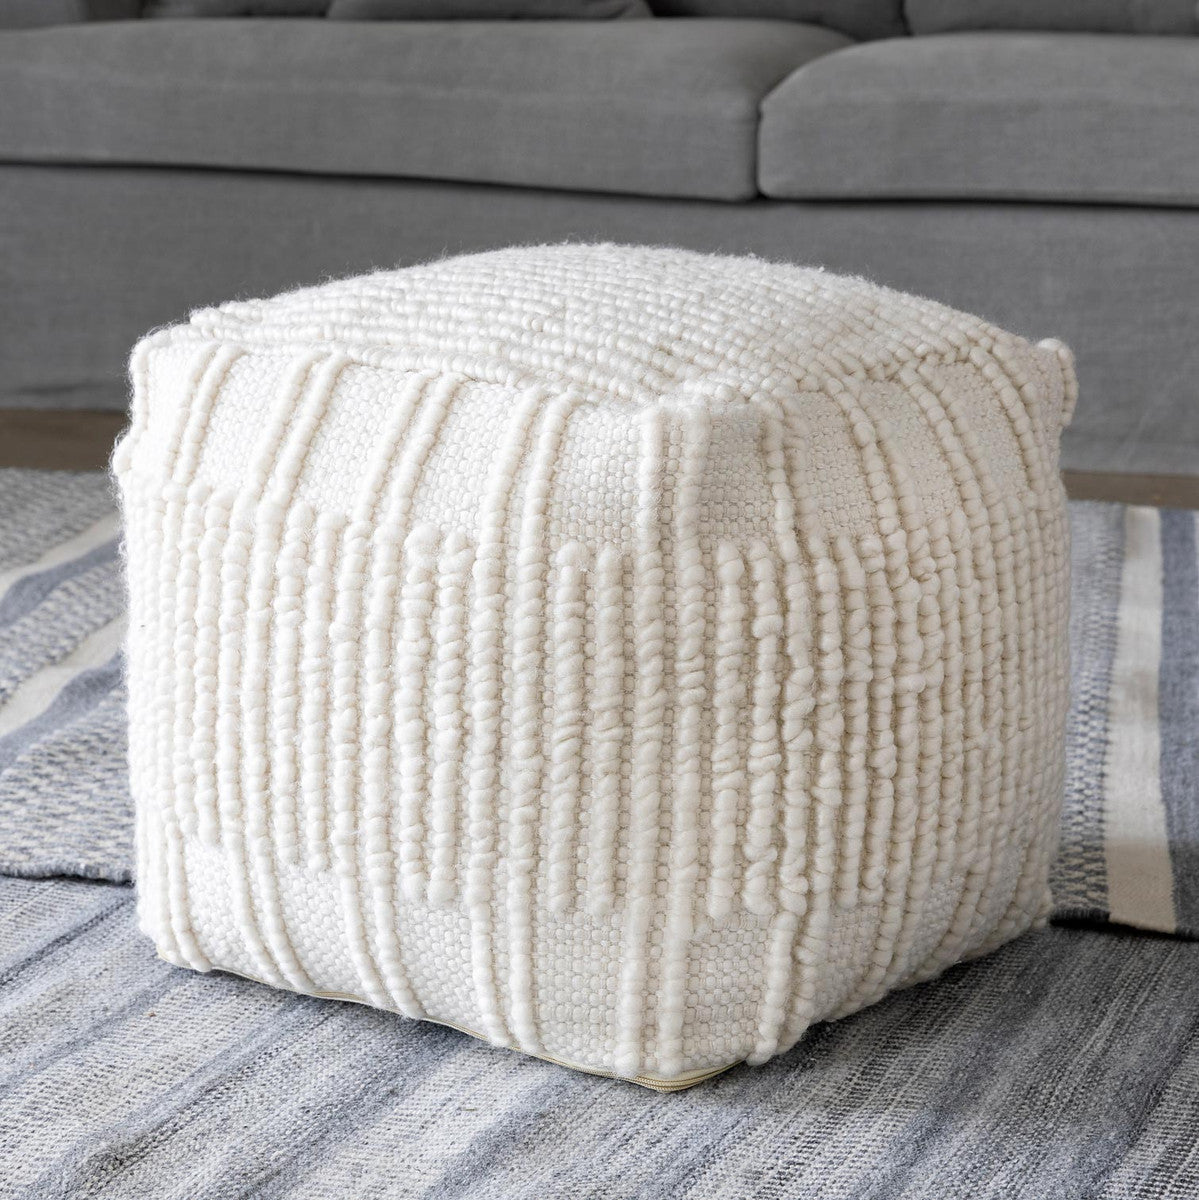 off white pouf on blue-gray rug and couch